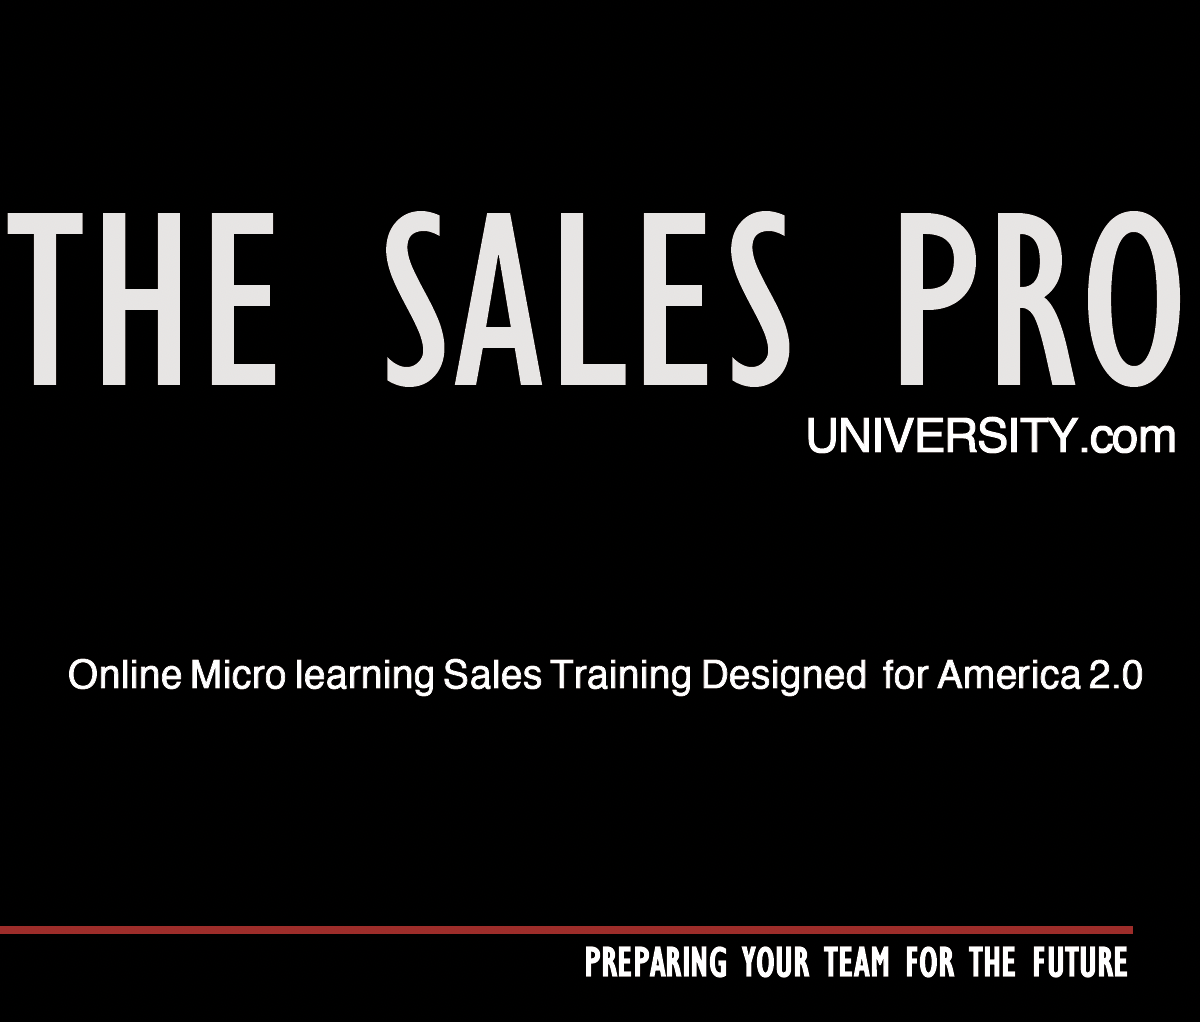 The Sales Pro Online University Destined to Change the Game Surpasses 22,000 Students